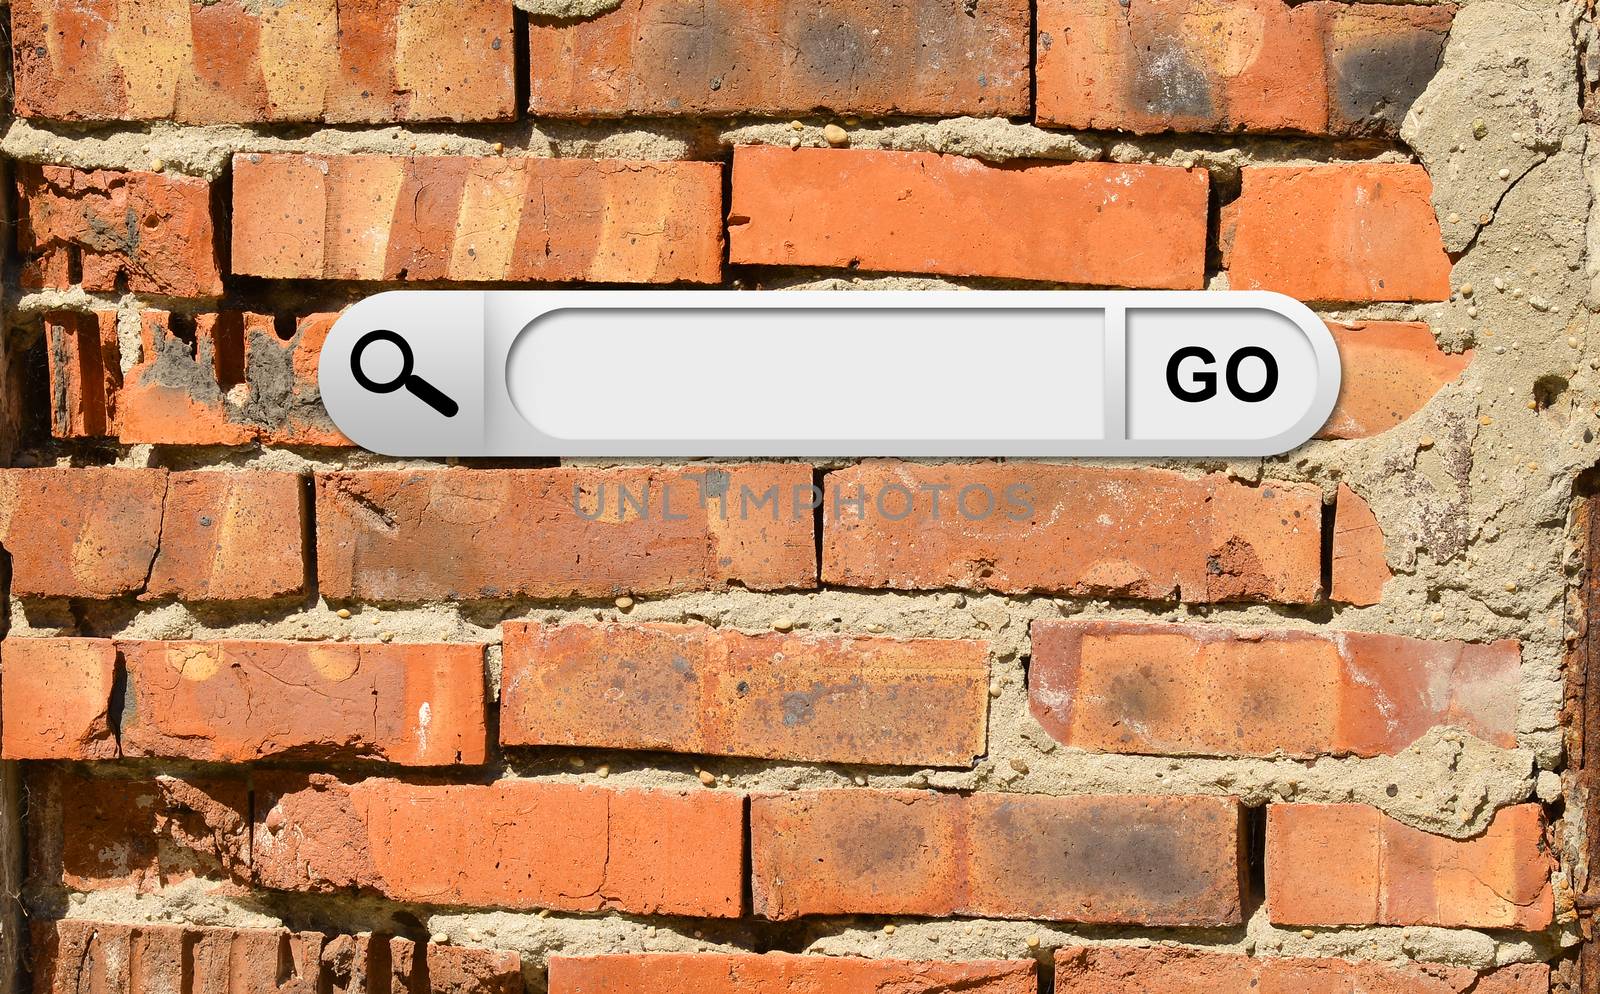 Search bar in browser. Cracked bricks wall on background